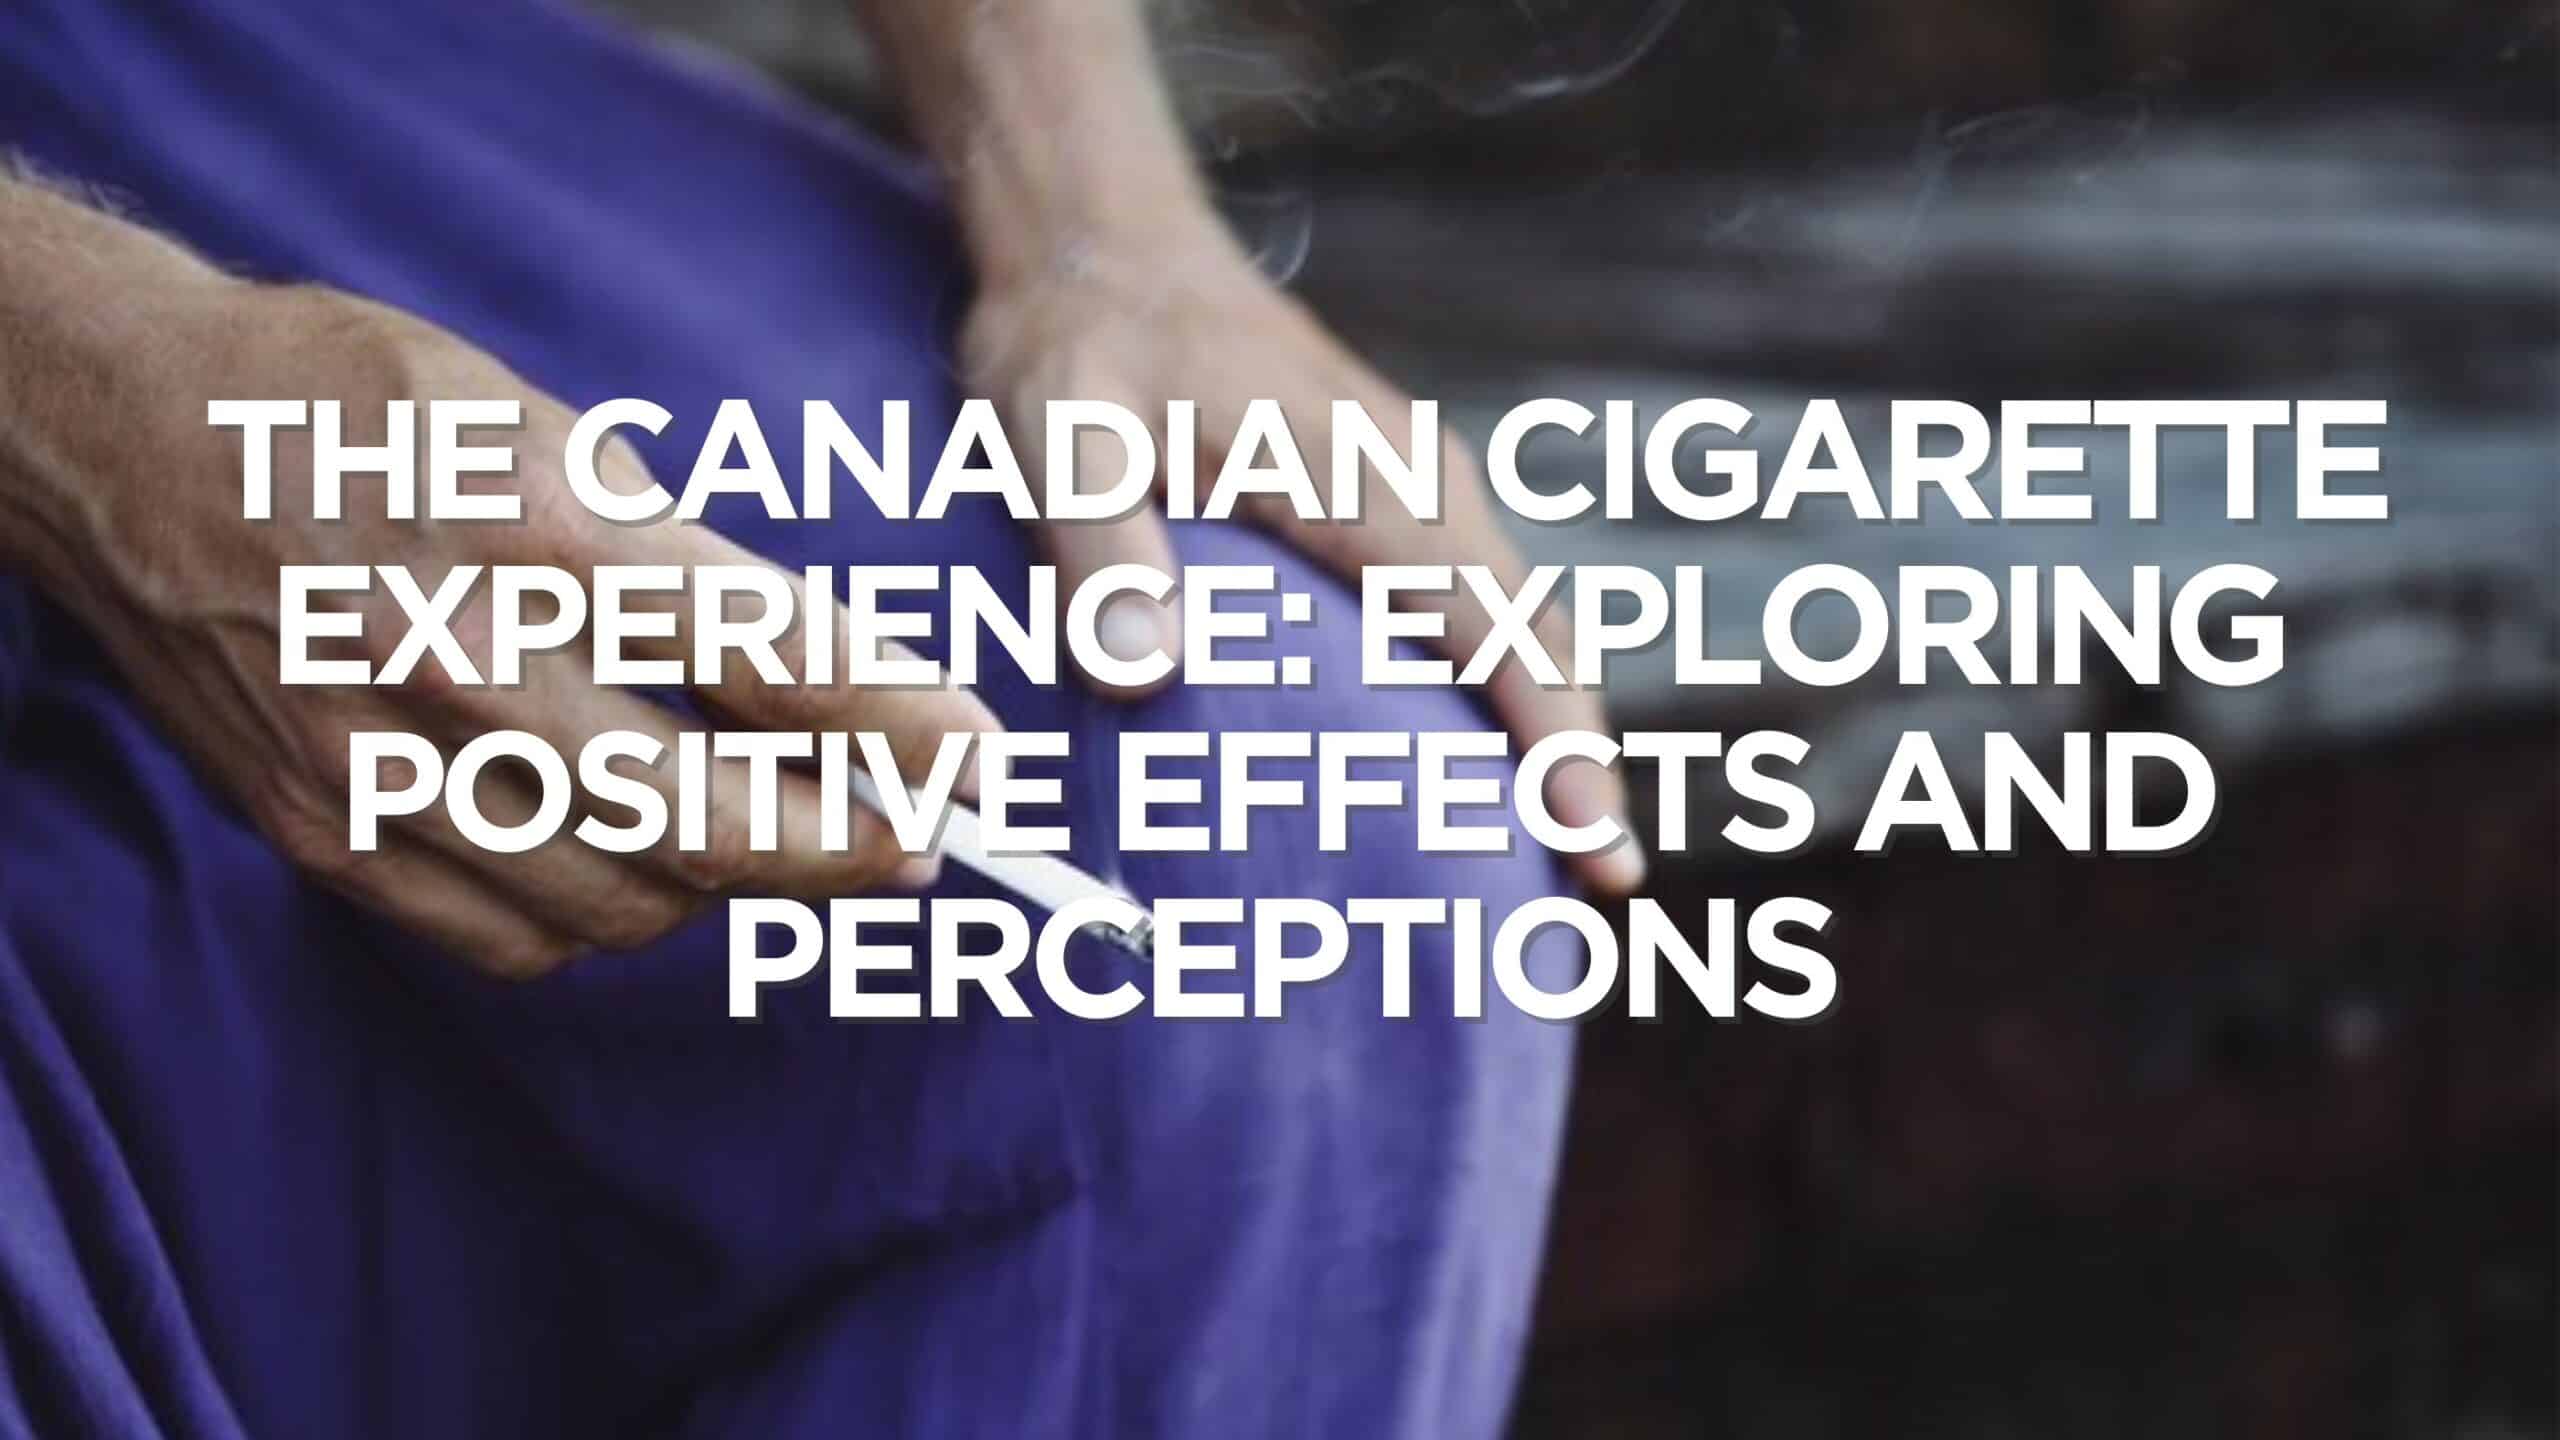 The Canadian Cigarette Experience Exploring Positive Effects and Perceptions